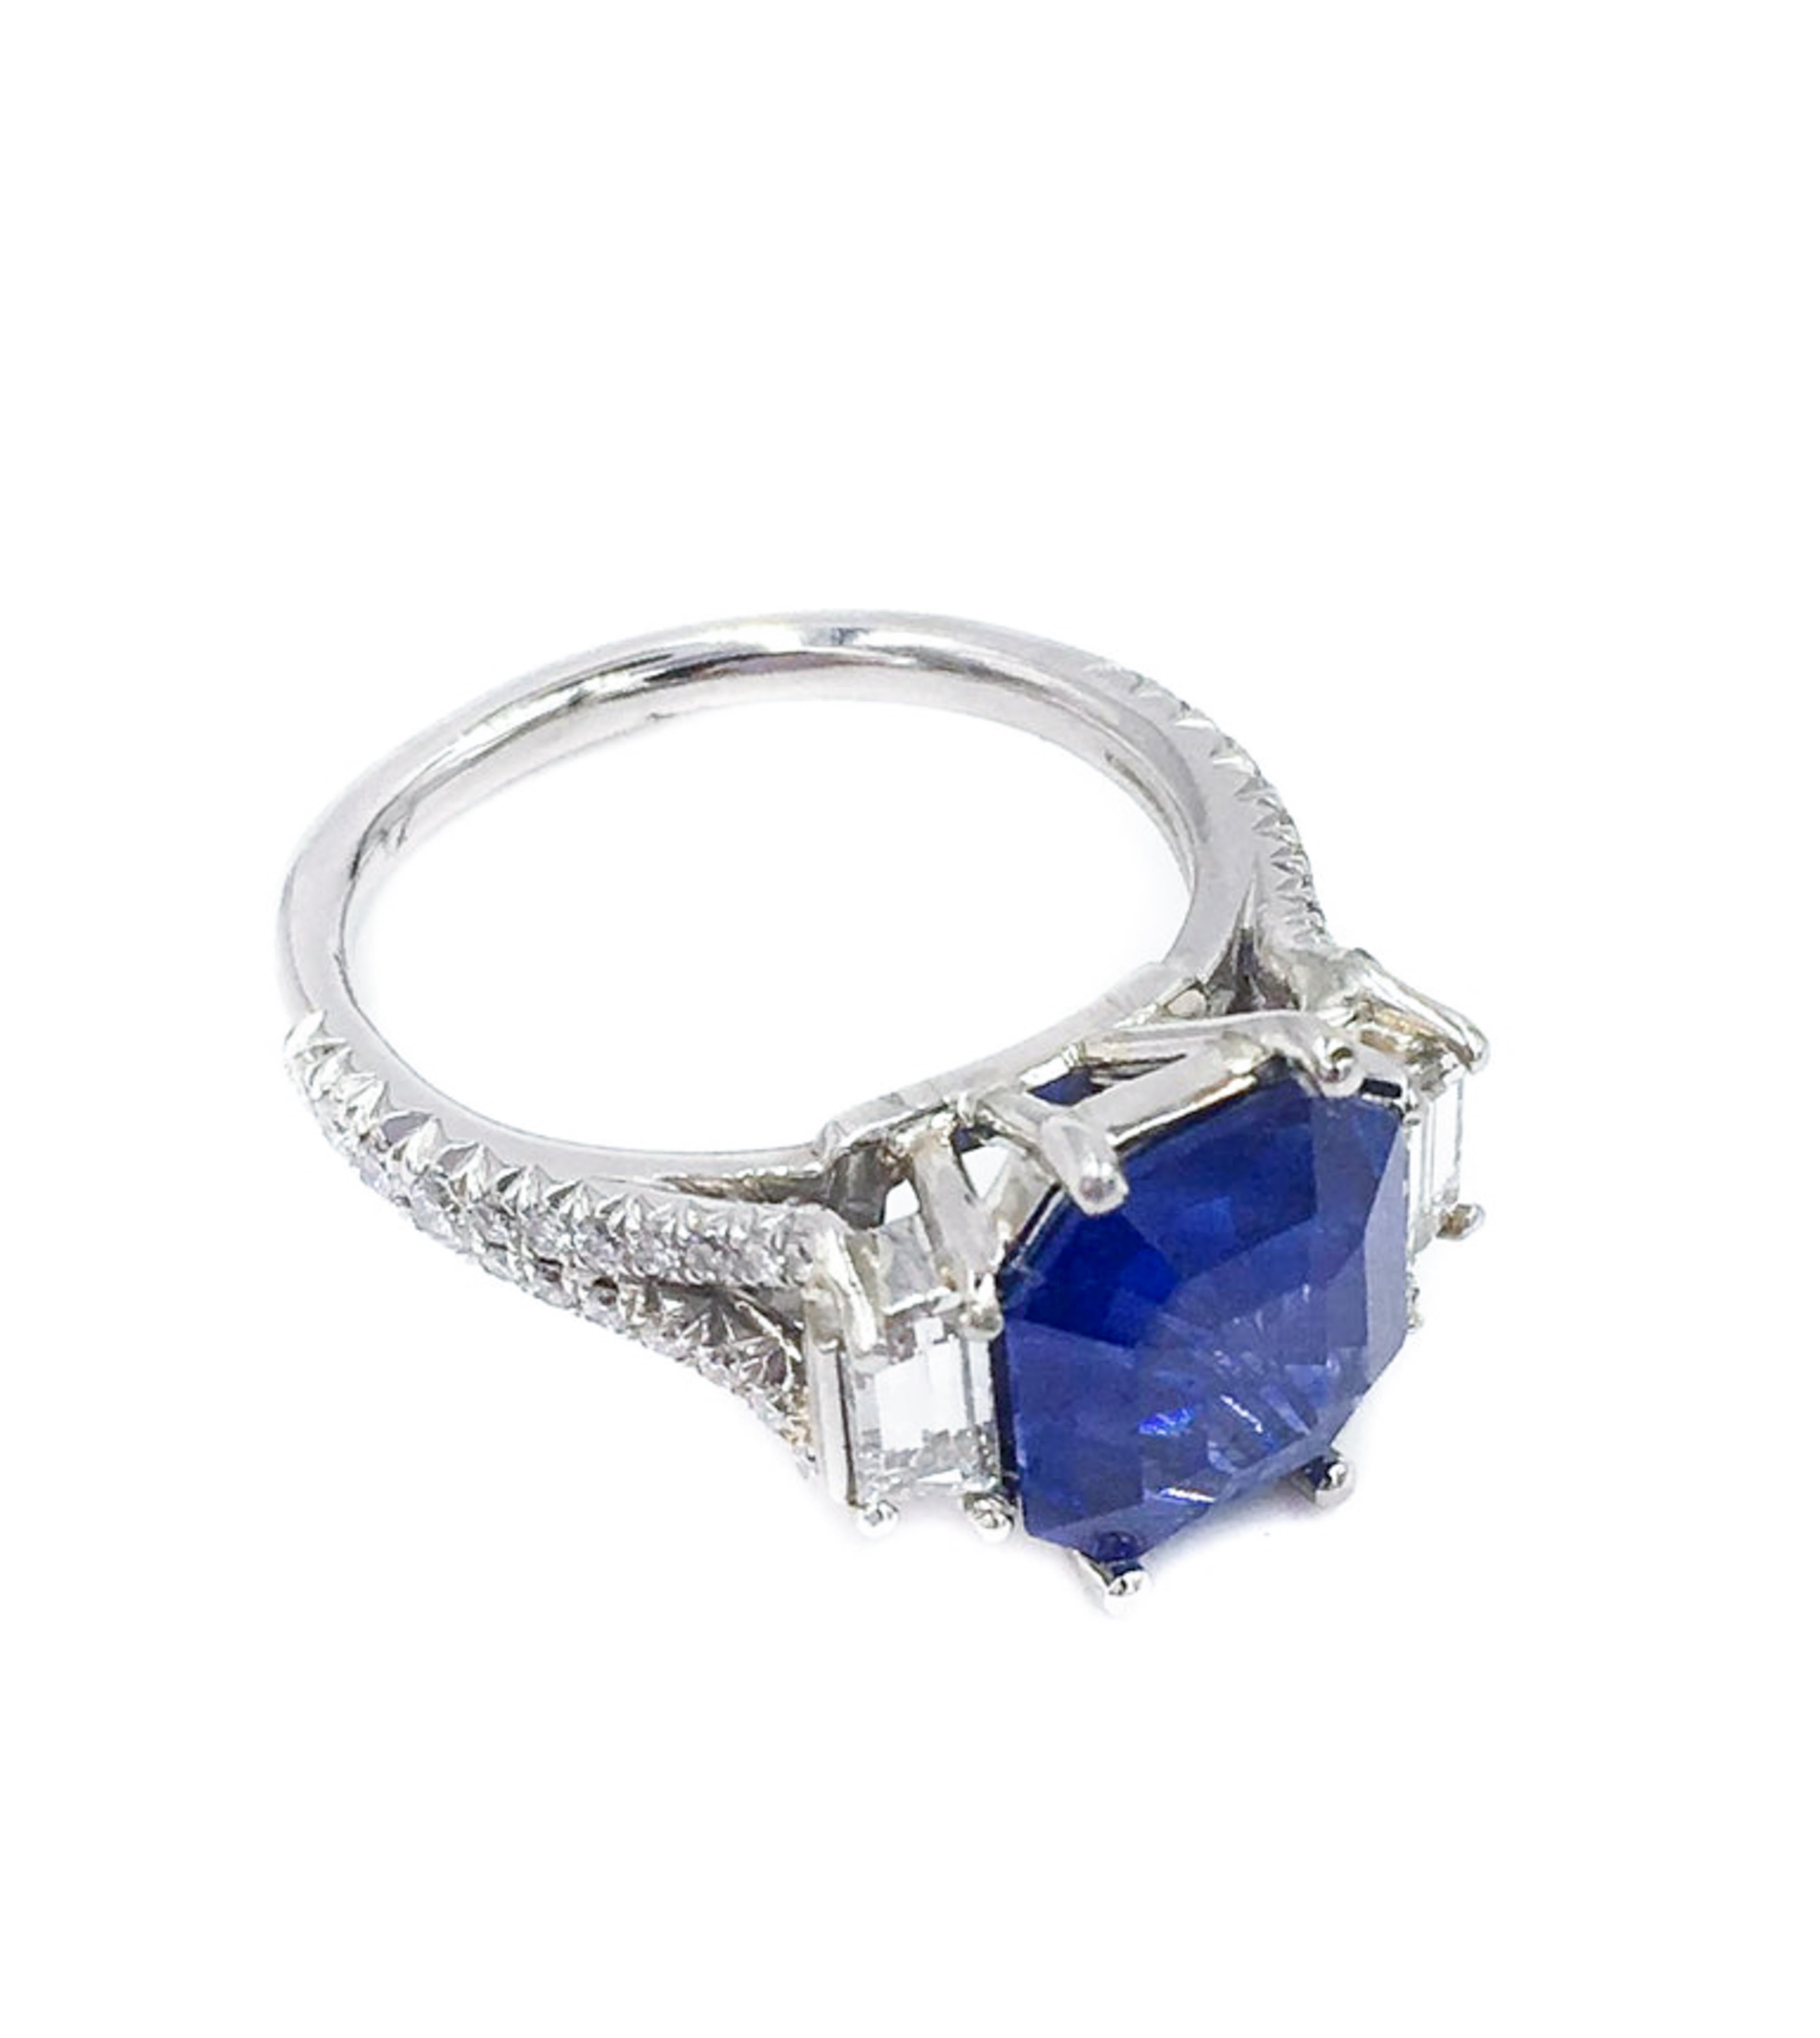 This is truly a special ring. The 4.01 carat is not your average sapphire, it is a modified octagonal cut making it distinct as well as versatile. 
The beautiful cornflower blue will pop from anyone's hand. 
Expertly set and handcrafted in platinum,